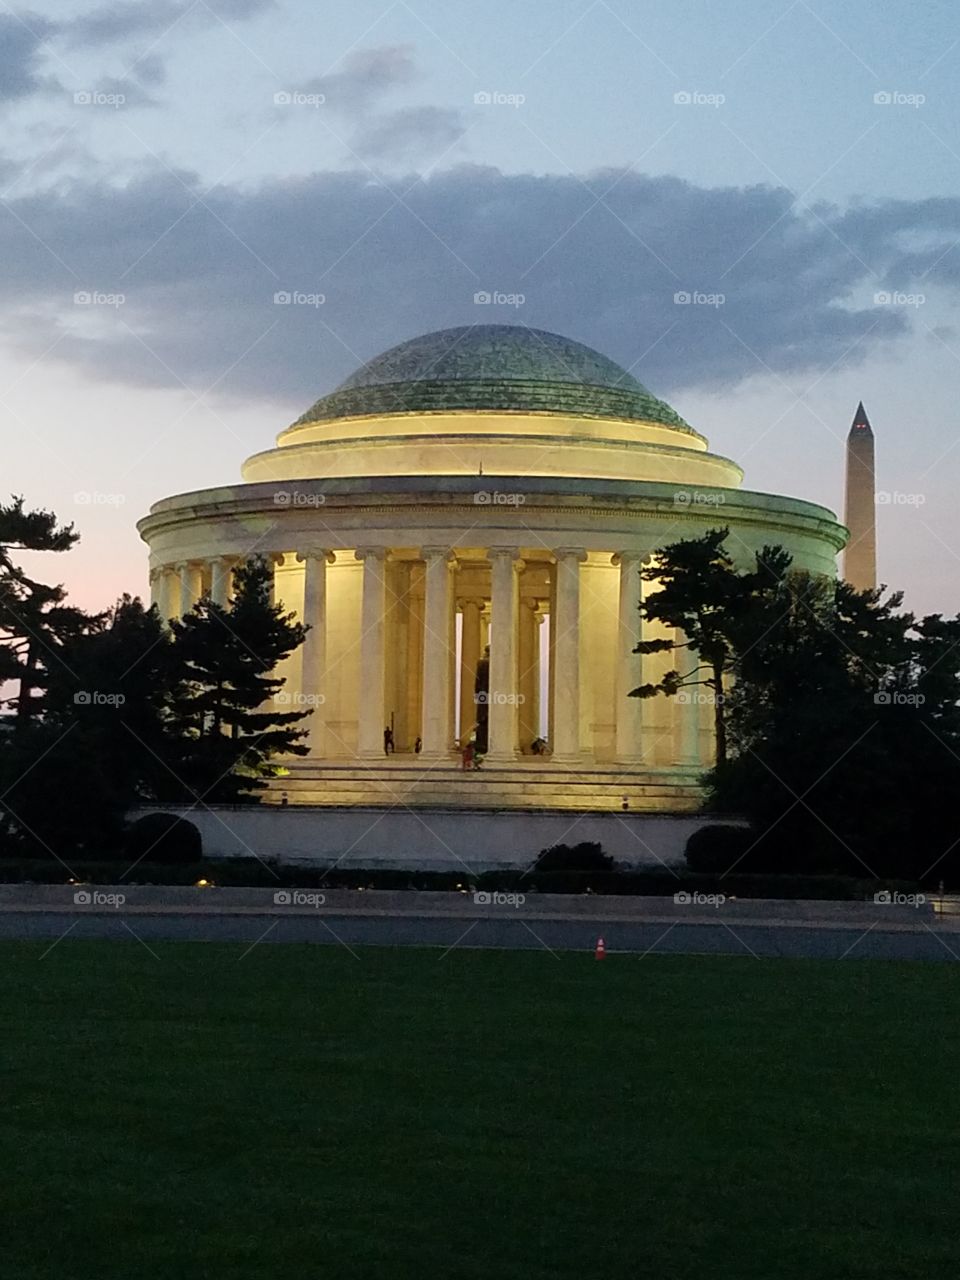 Washington DC in the early evening